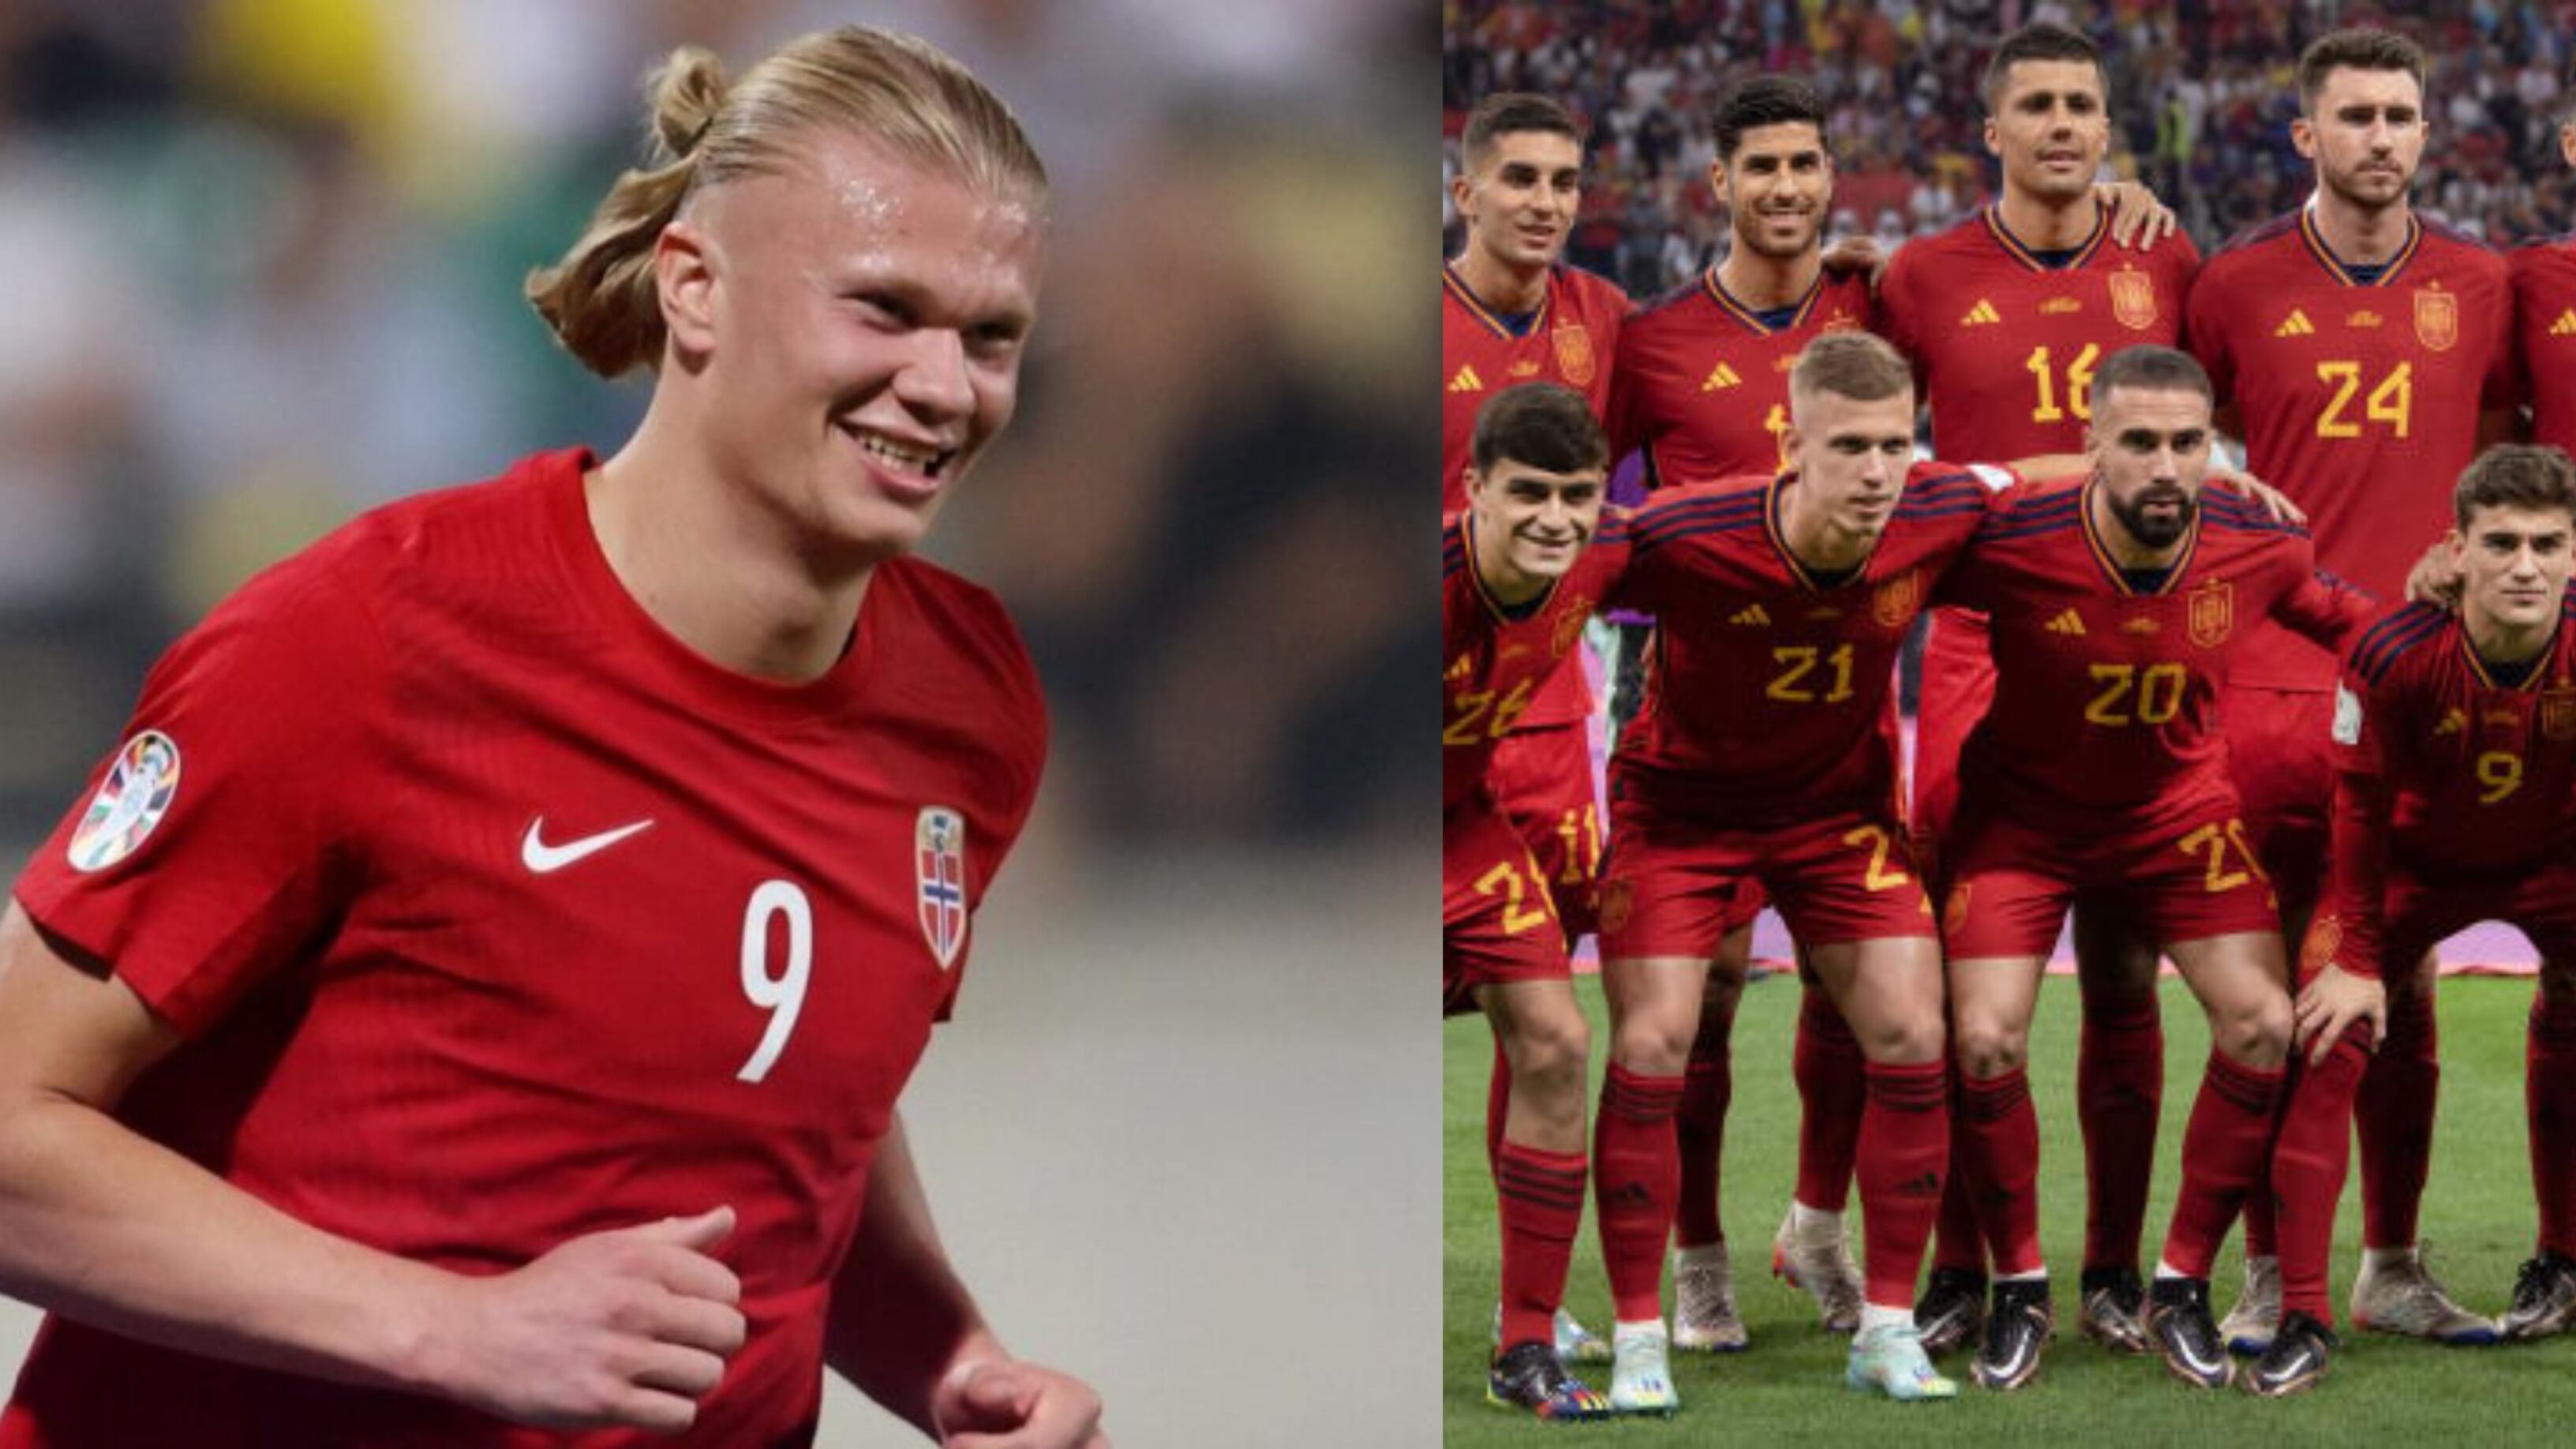 Spain's manager's warning to Erling Haaland hours before Spain against Norway